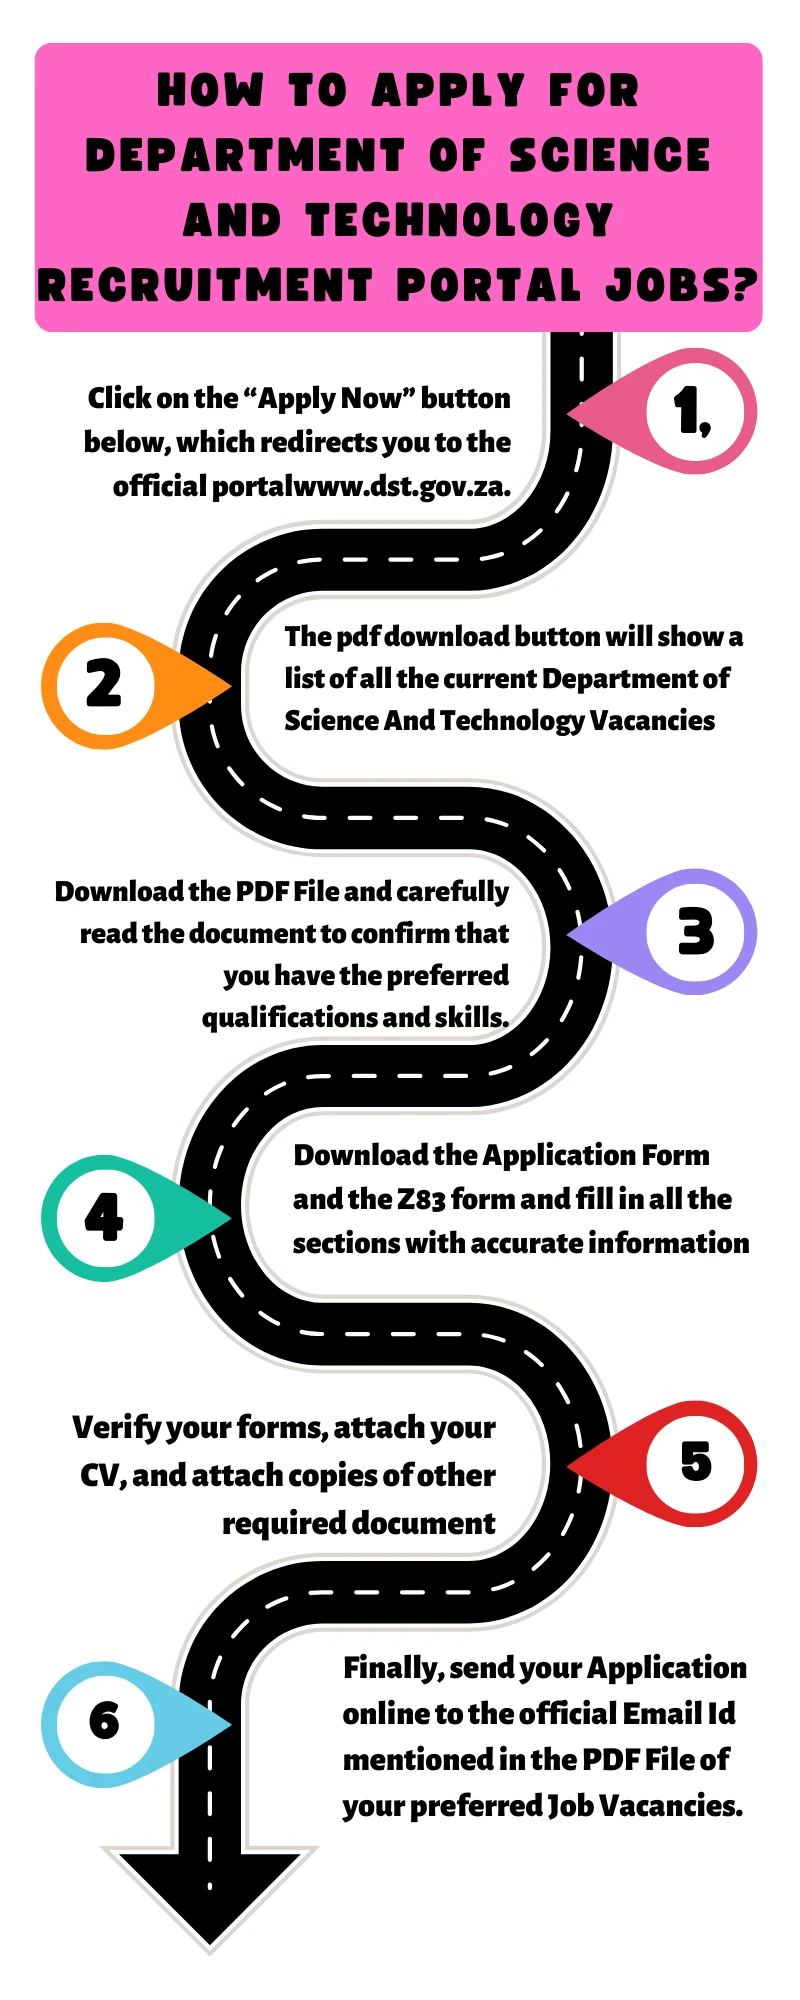 How To Apply for Department of Science And Technology Recruitment Portal Jobs?